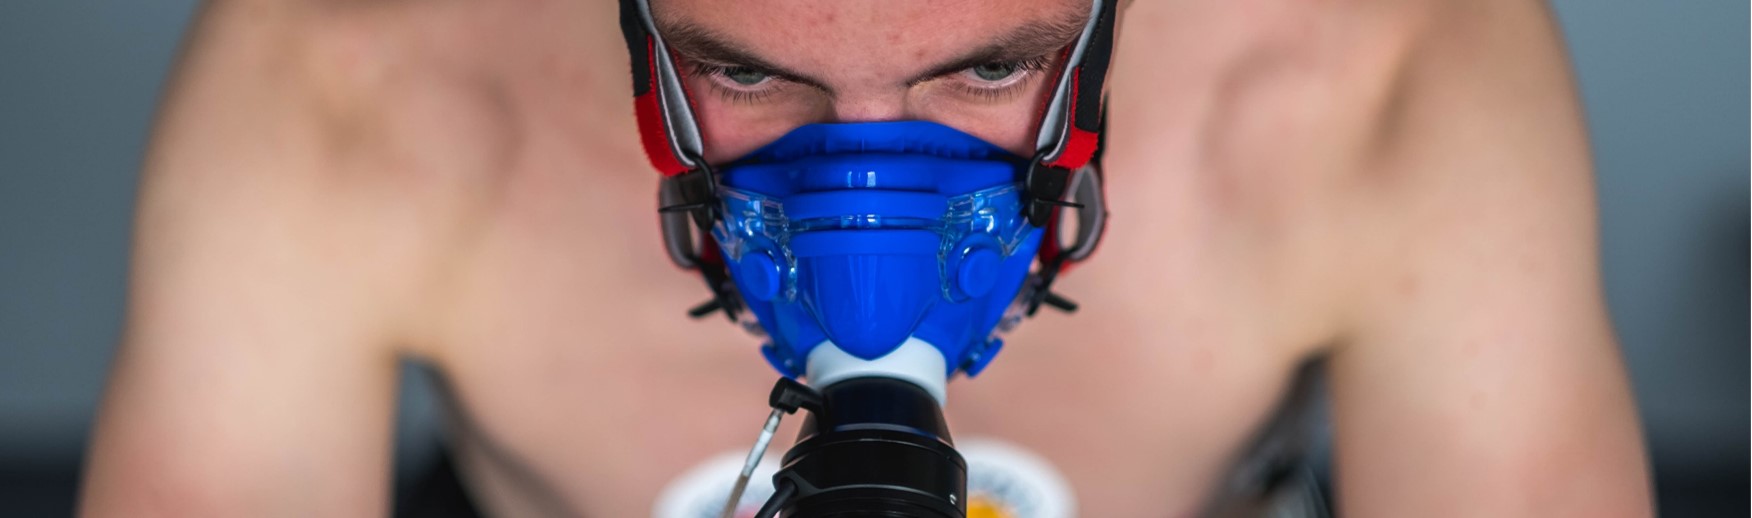  Man with breathing mask during a spiroergometry